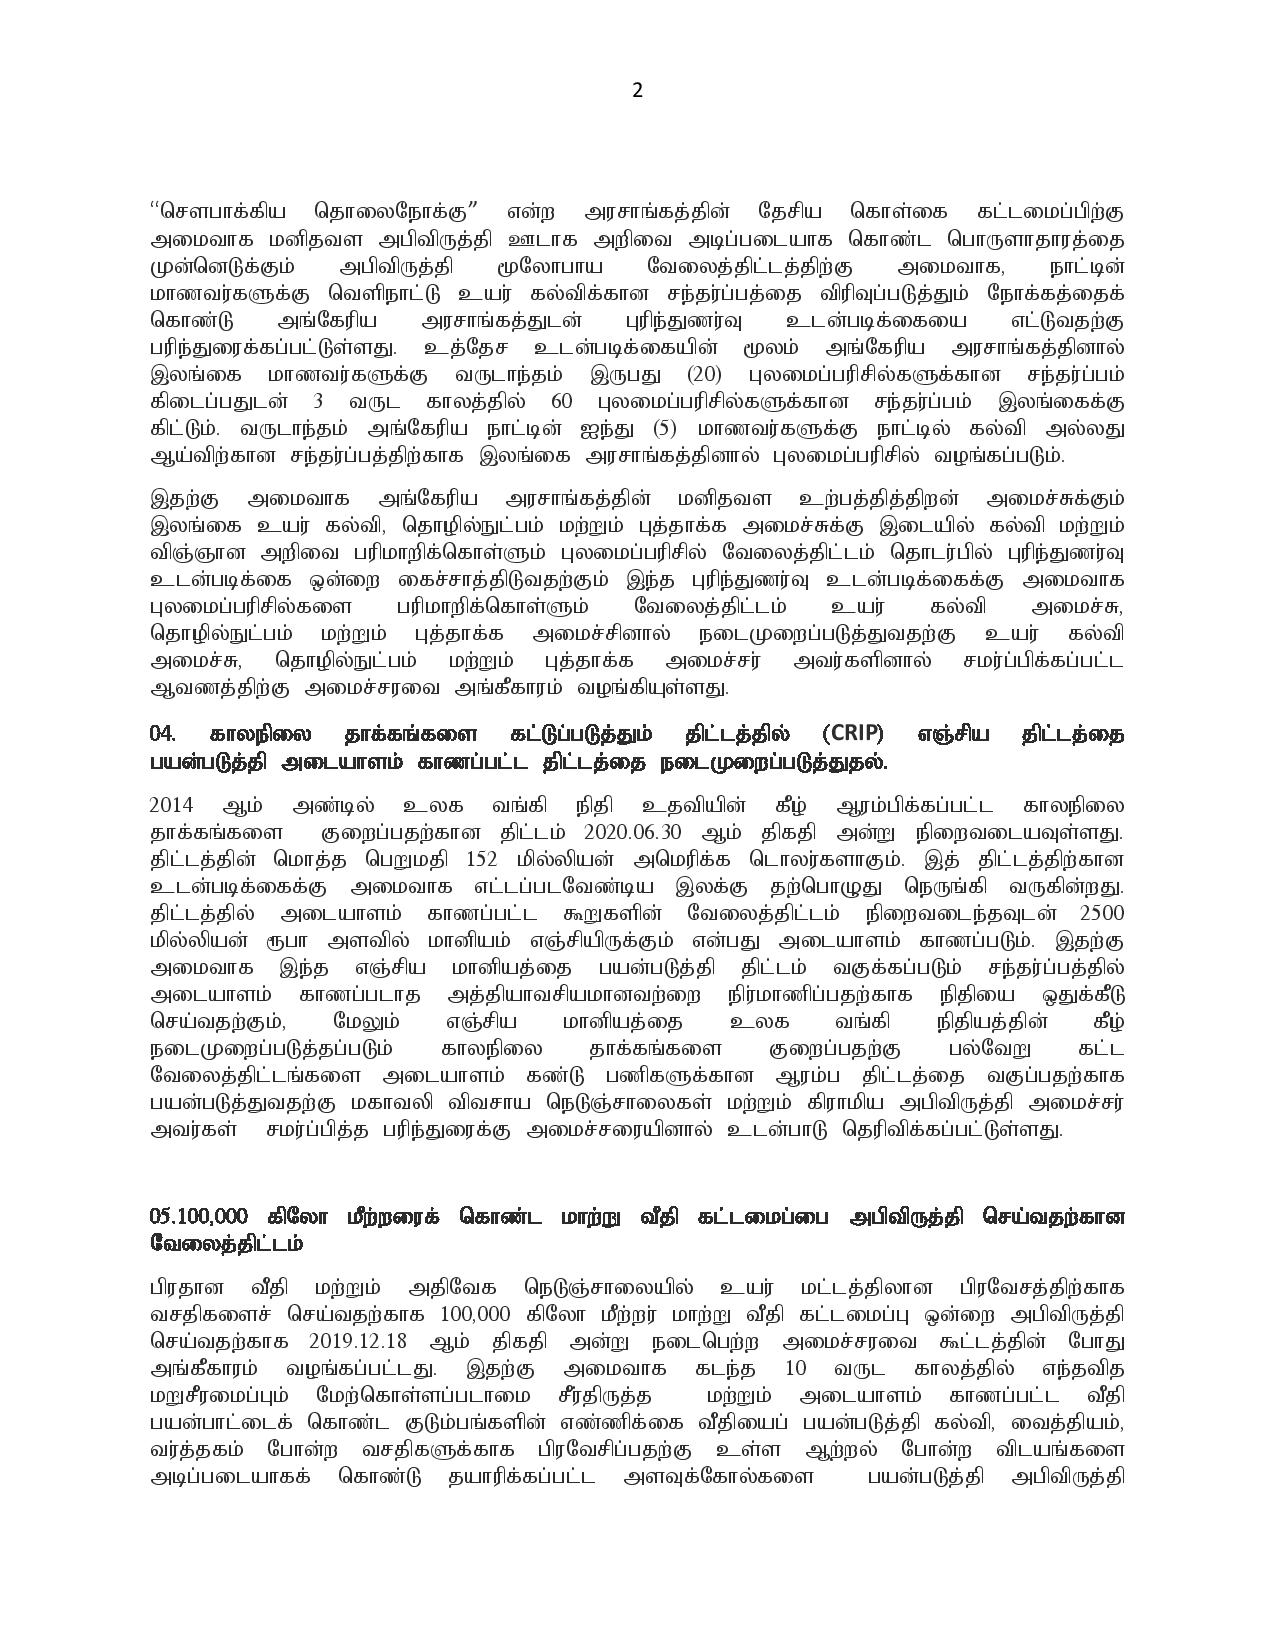 05.02.2020 Cabinet Tamil page 002